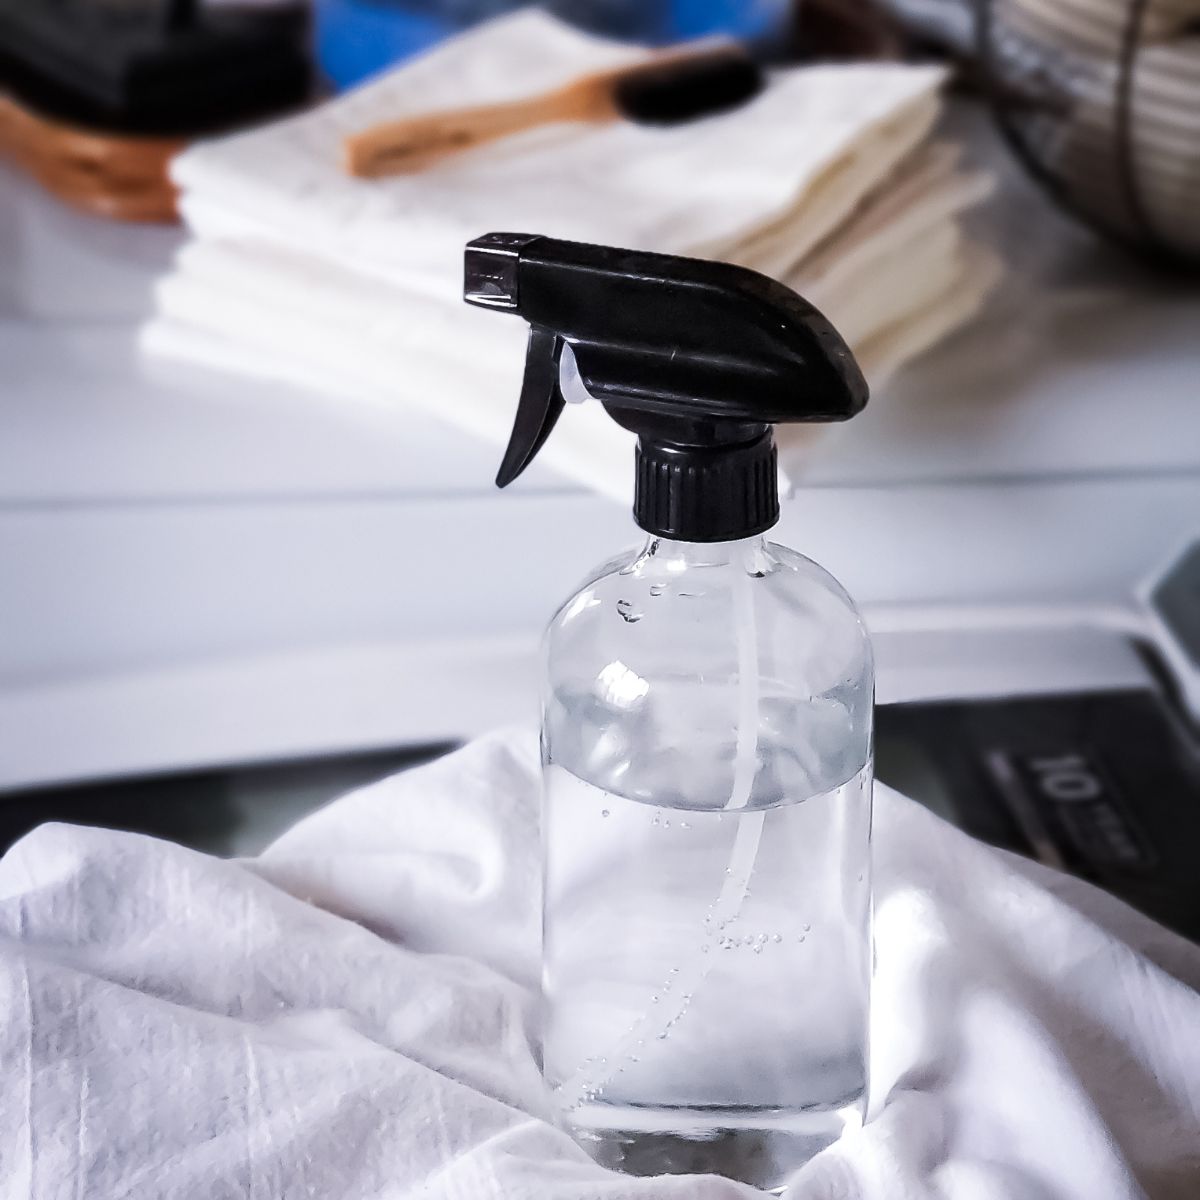 How to Make Natural Laundry Stain Remover